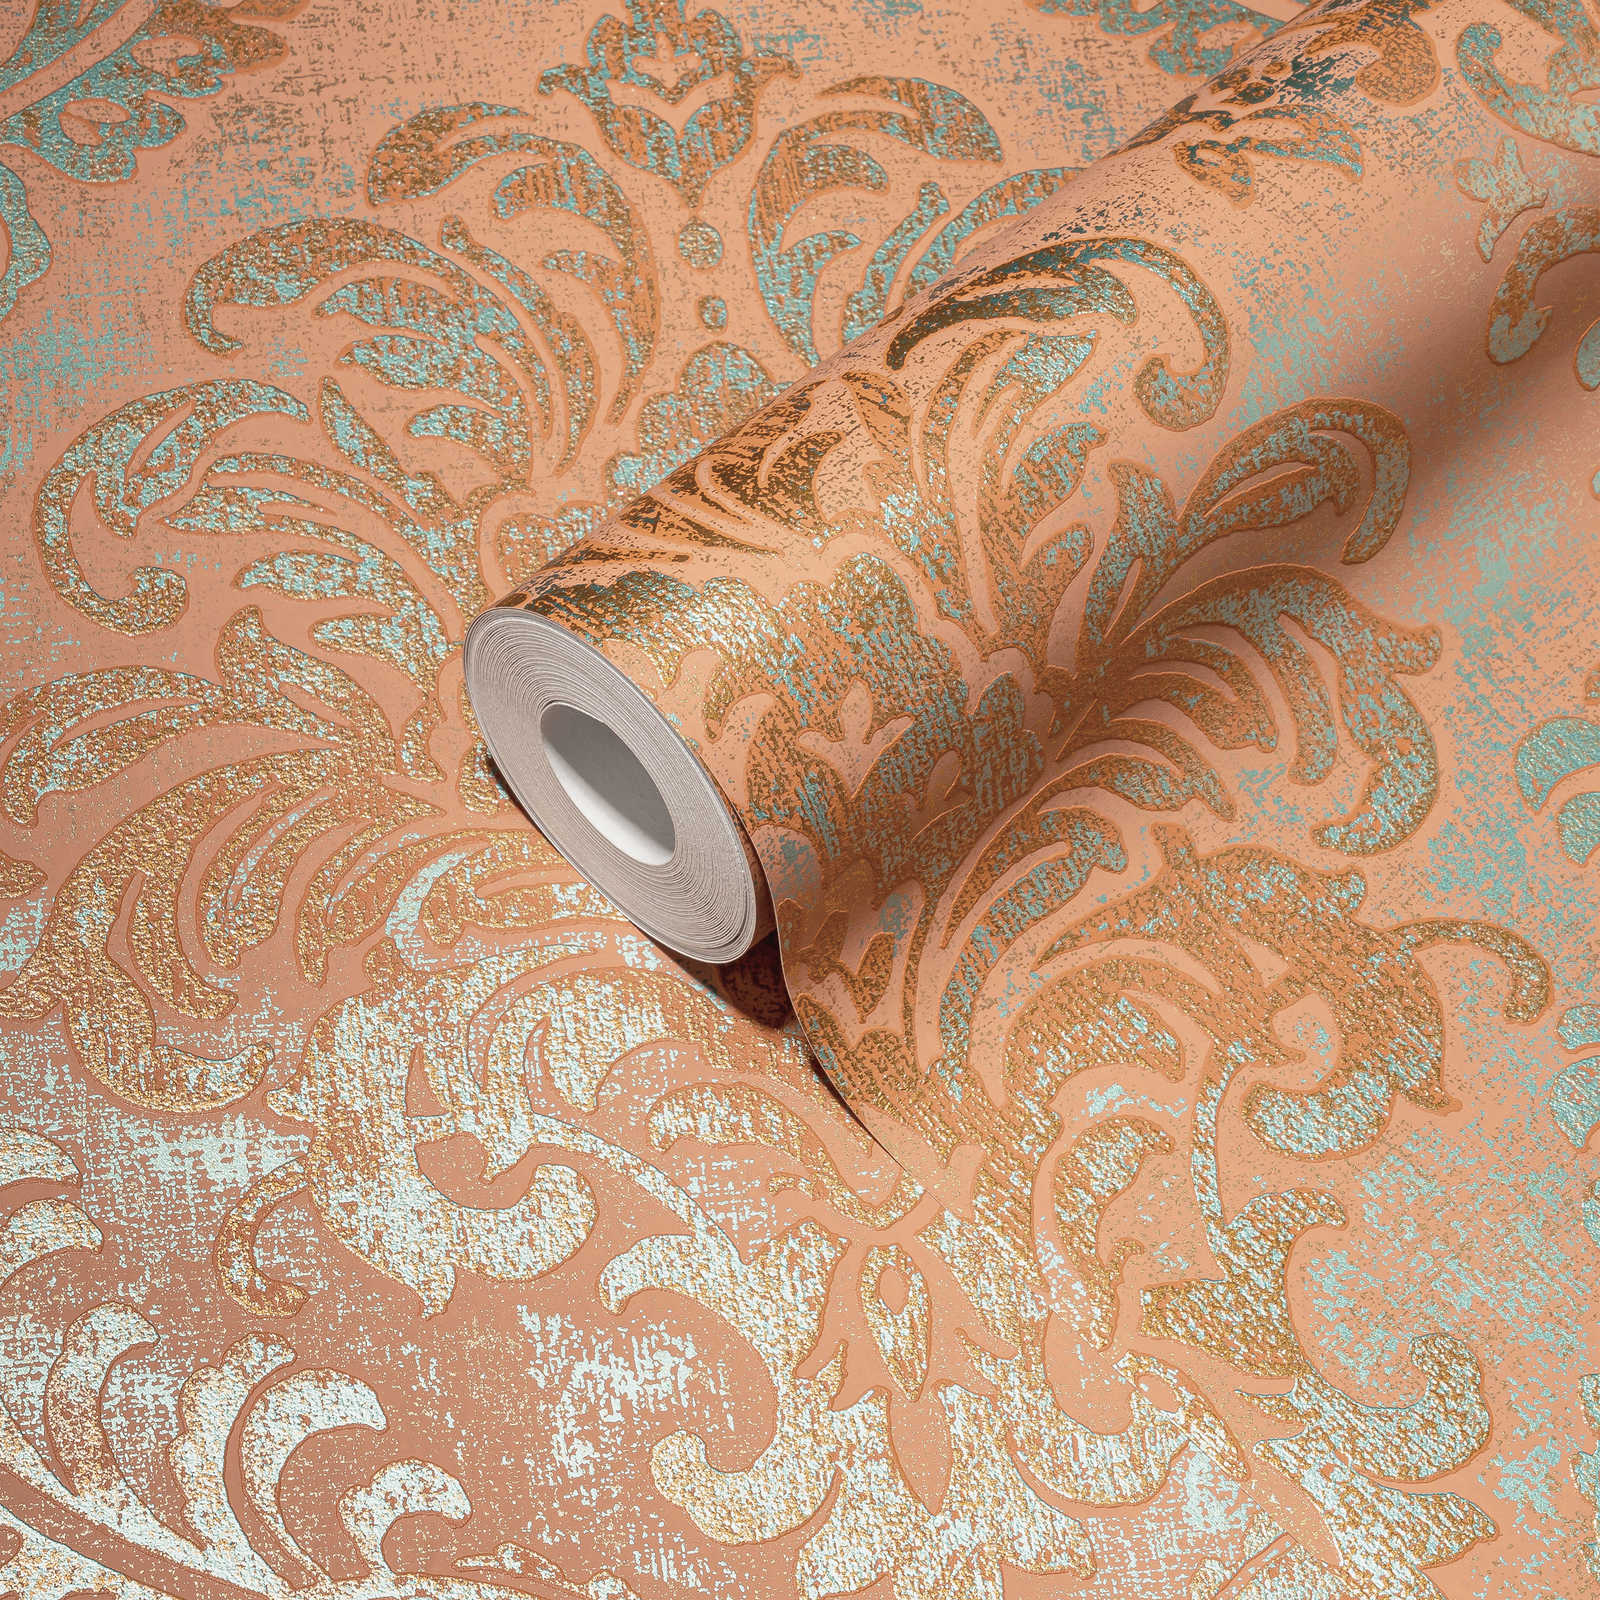             Metallic-look non-woven wallpaper with ornament - orange, pink, turquoise
        